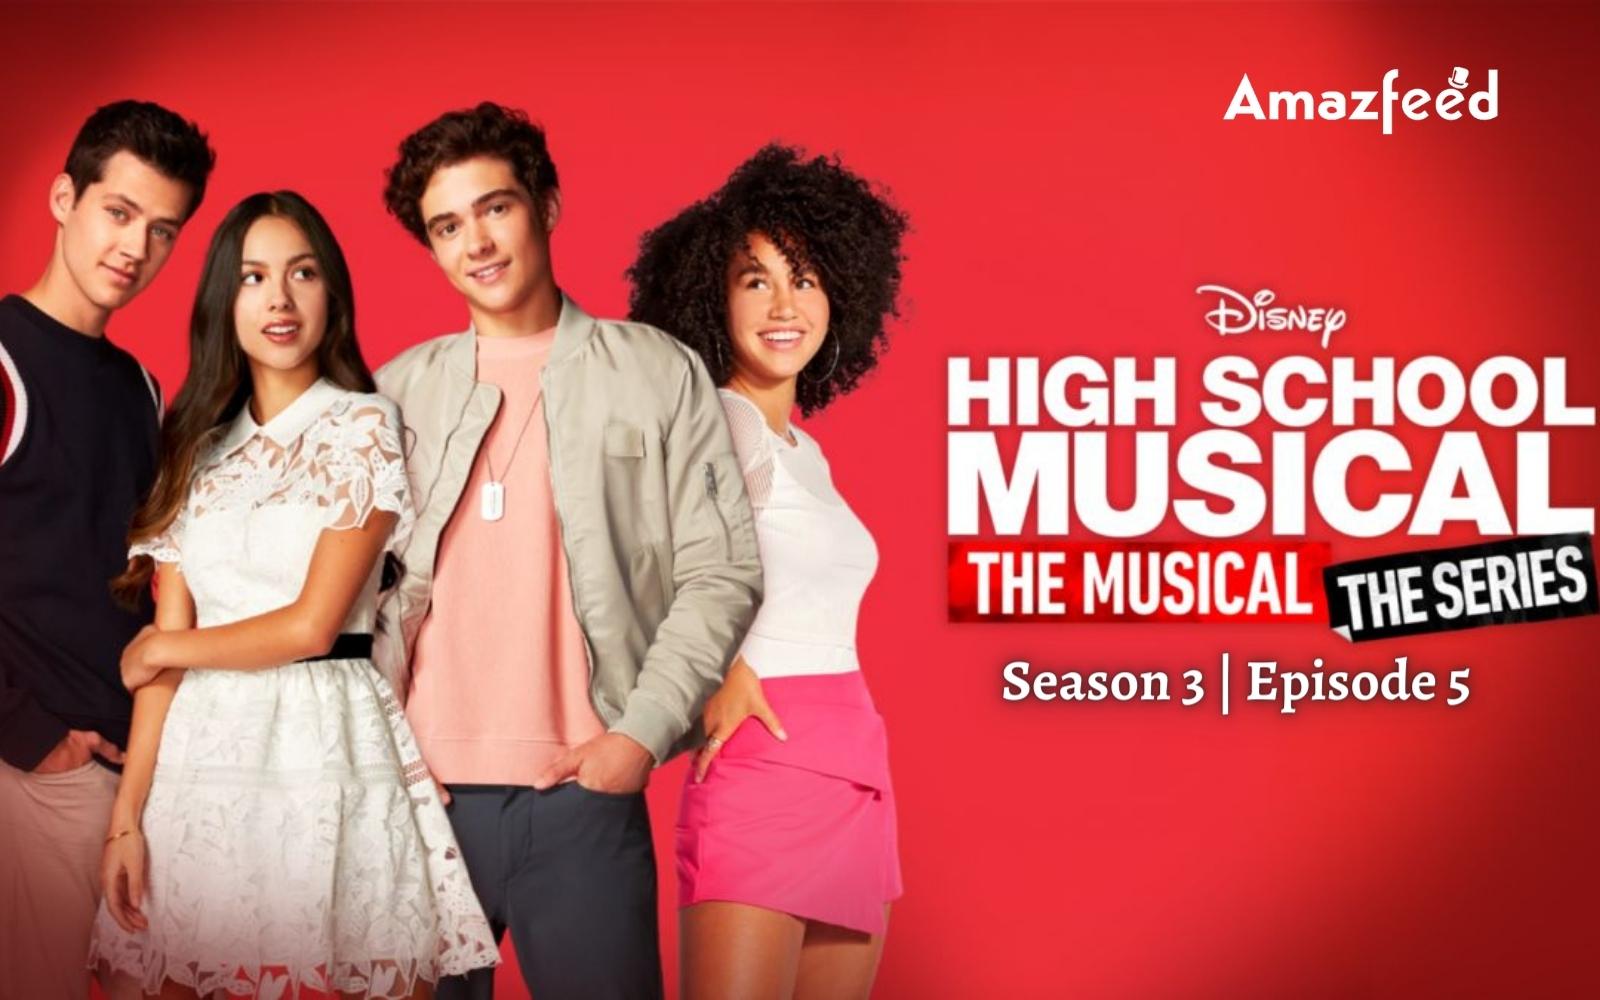 High School Musical: The Musical - The Series Season 3 Episode 5 ⇒ Countdown, Release Date, Spoilers, Recap, Cast & News Updates